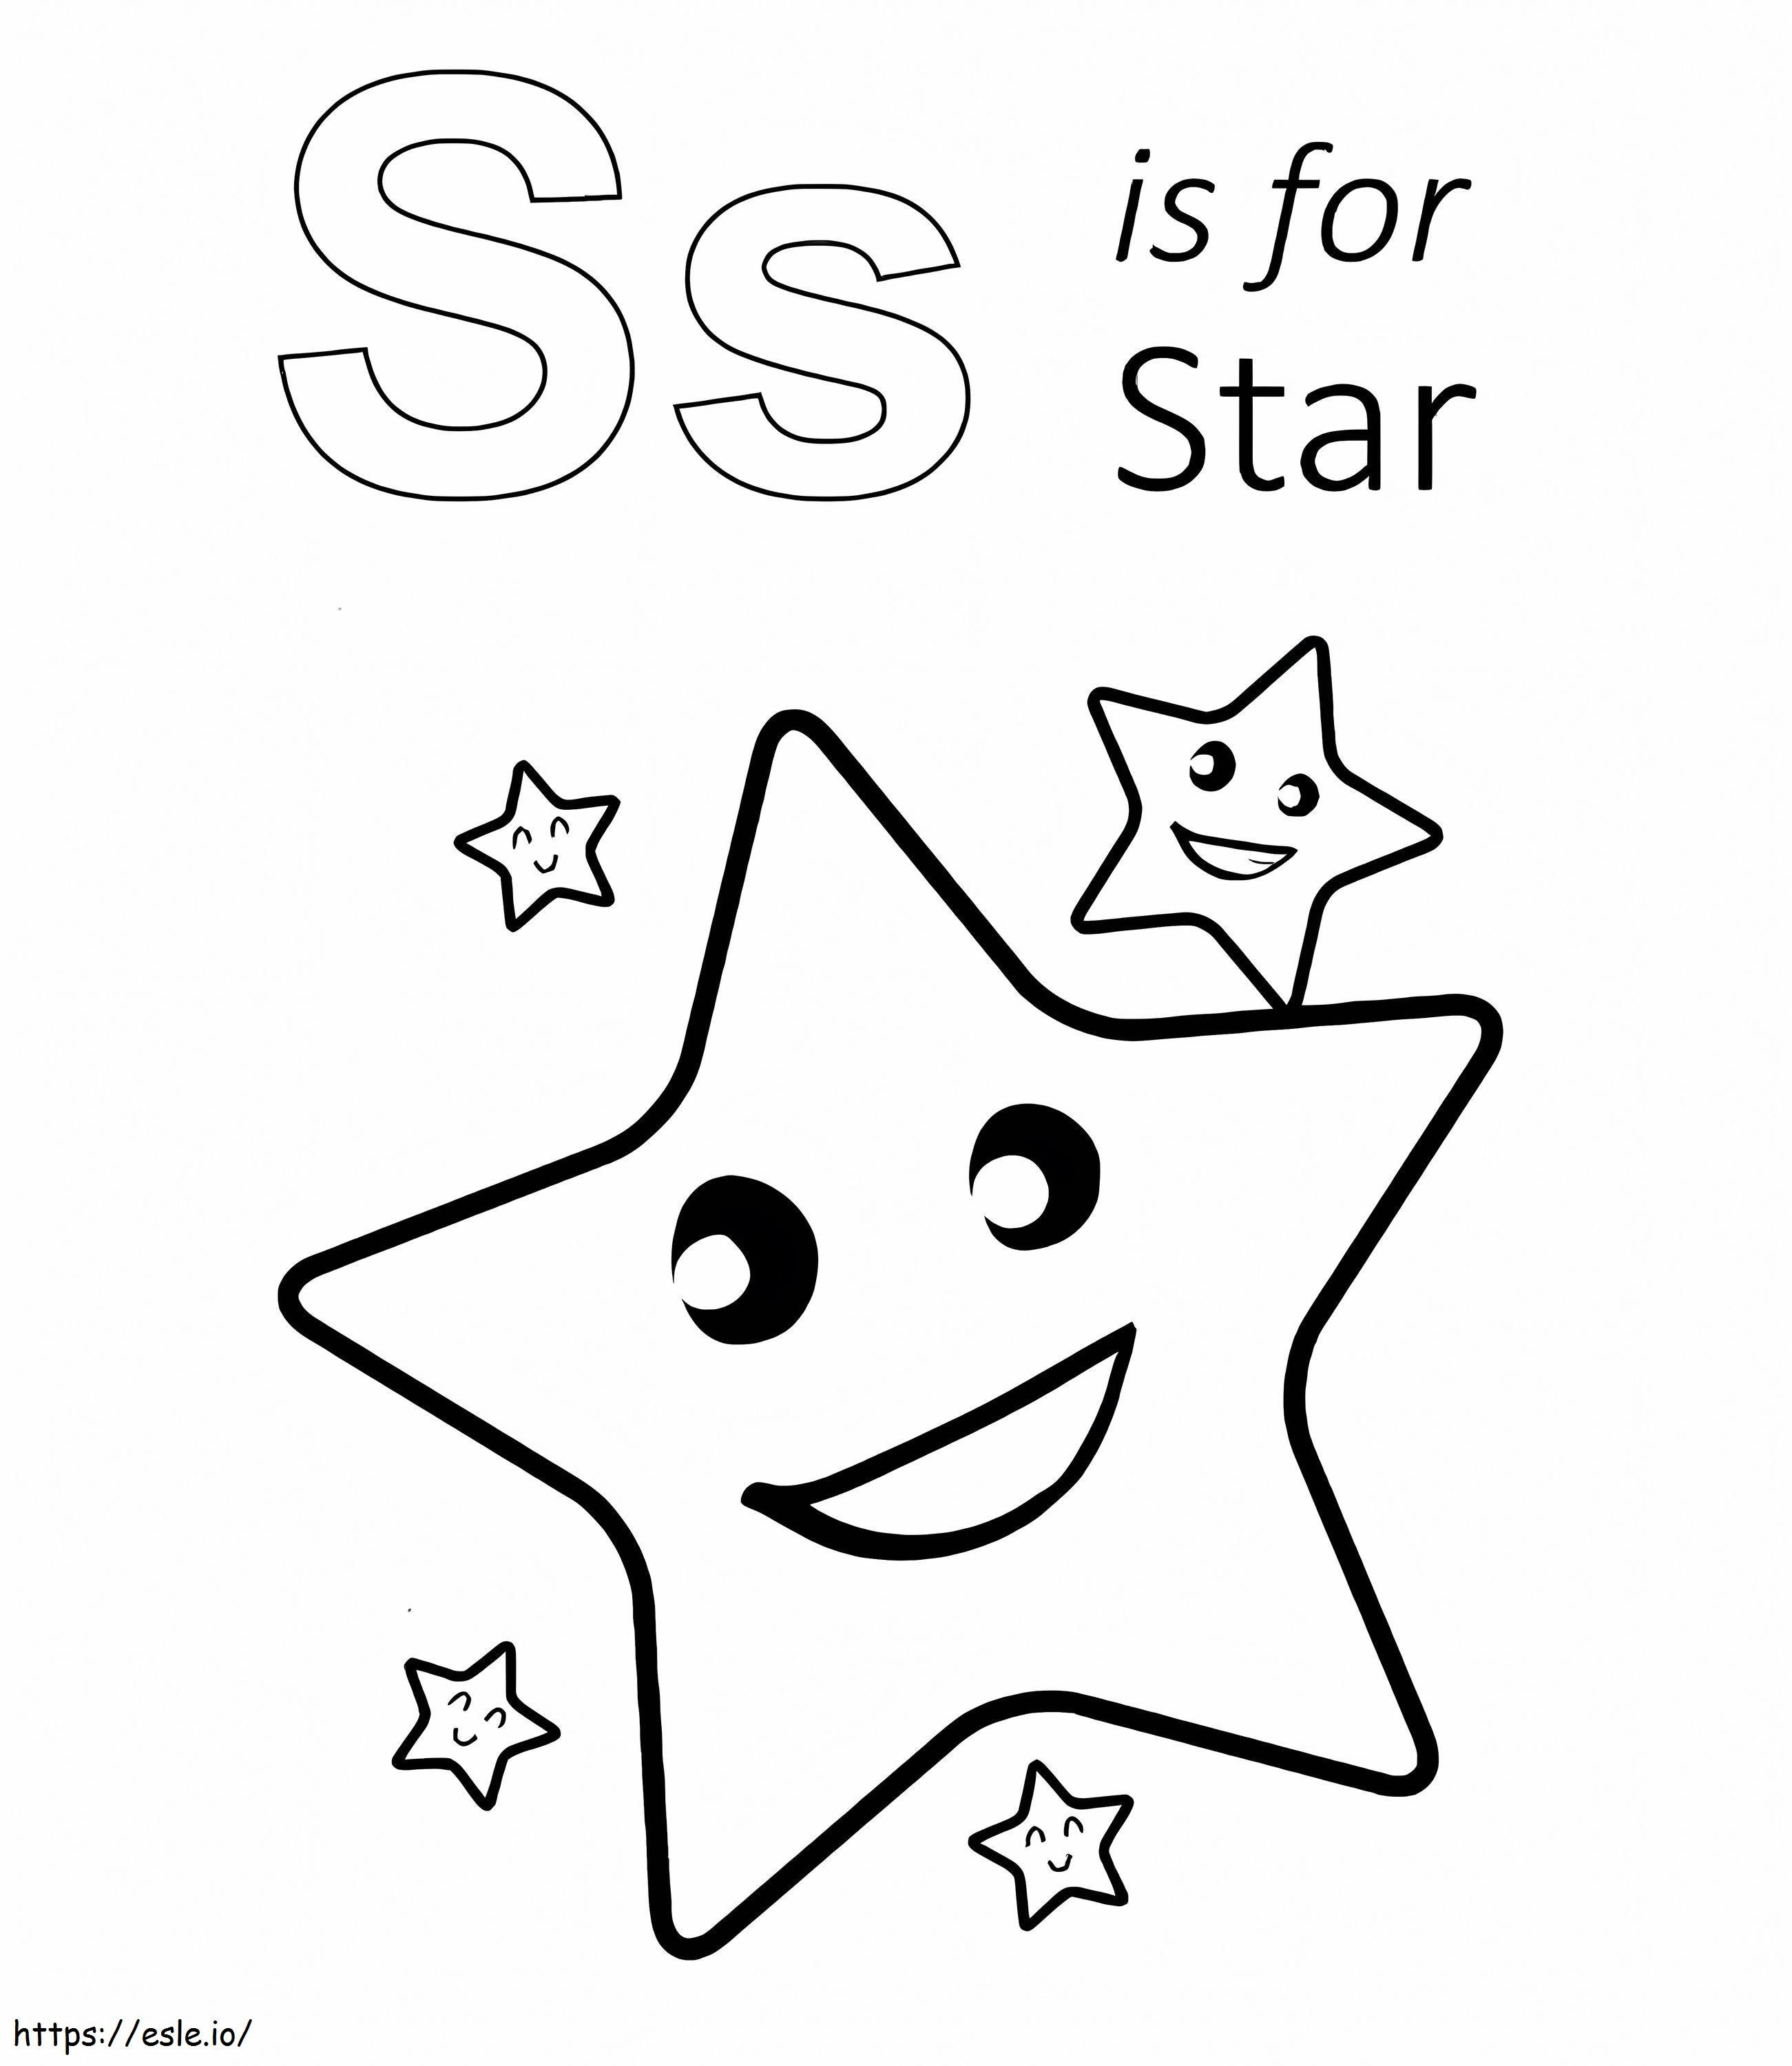 S Is For Star coloring page